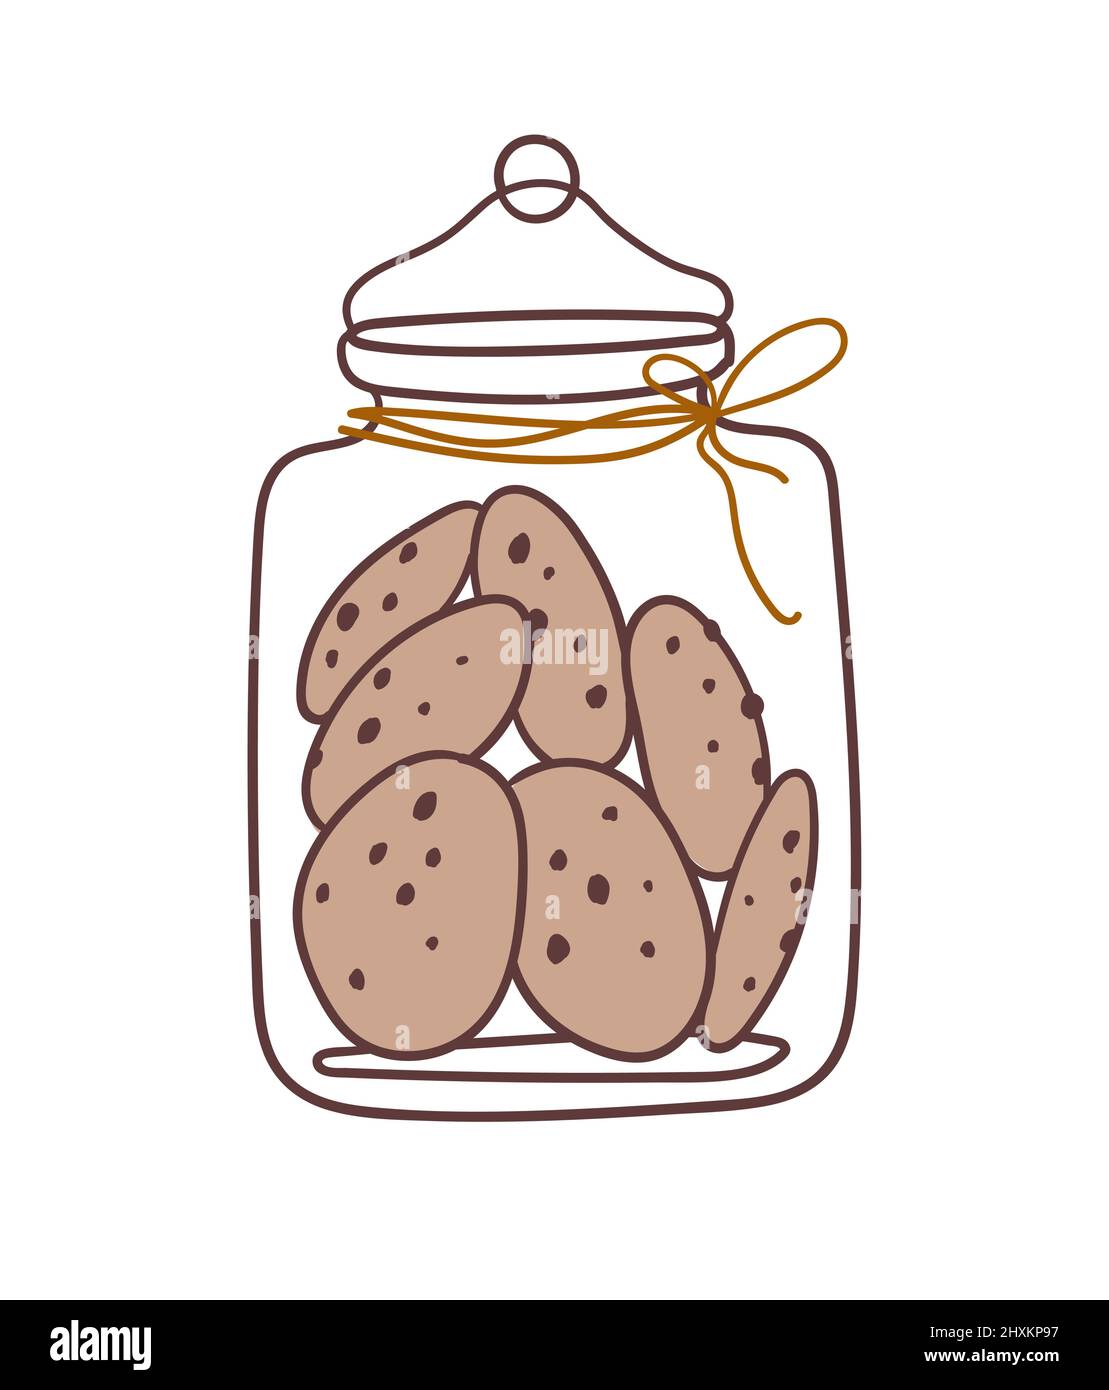 https://c8.alamy.com/comp/2HXKP97/a-jar-of-cookies-vector-illustration-in-a-flat-style-2HXKP97.jpg